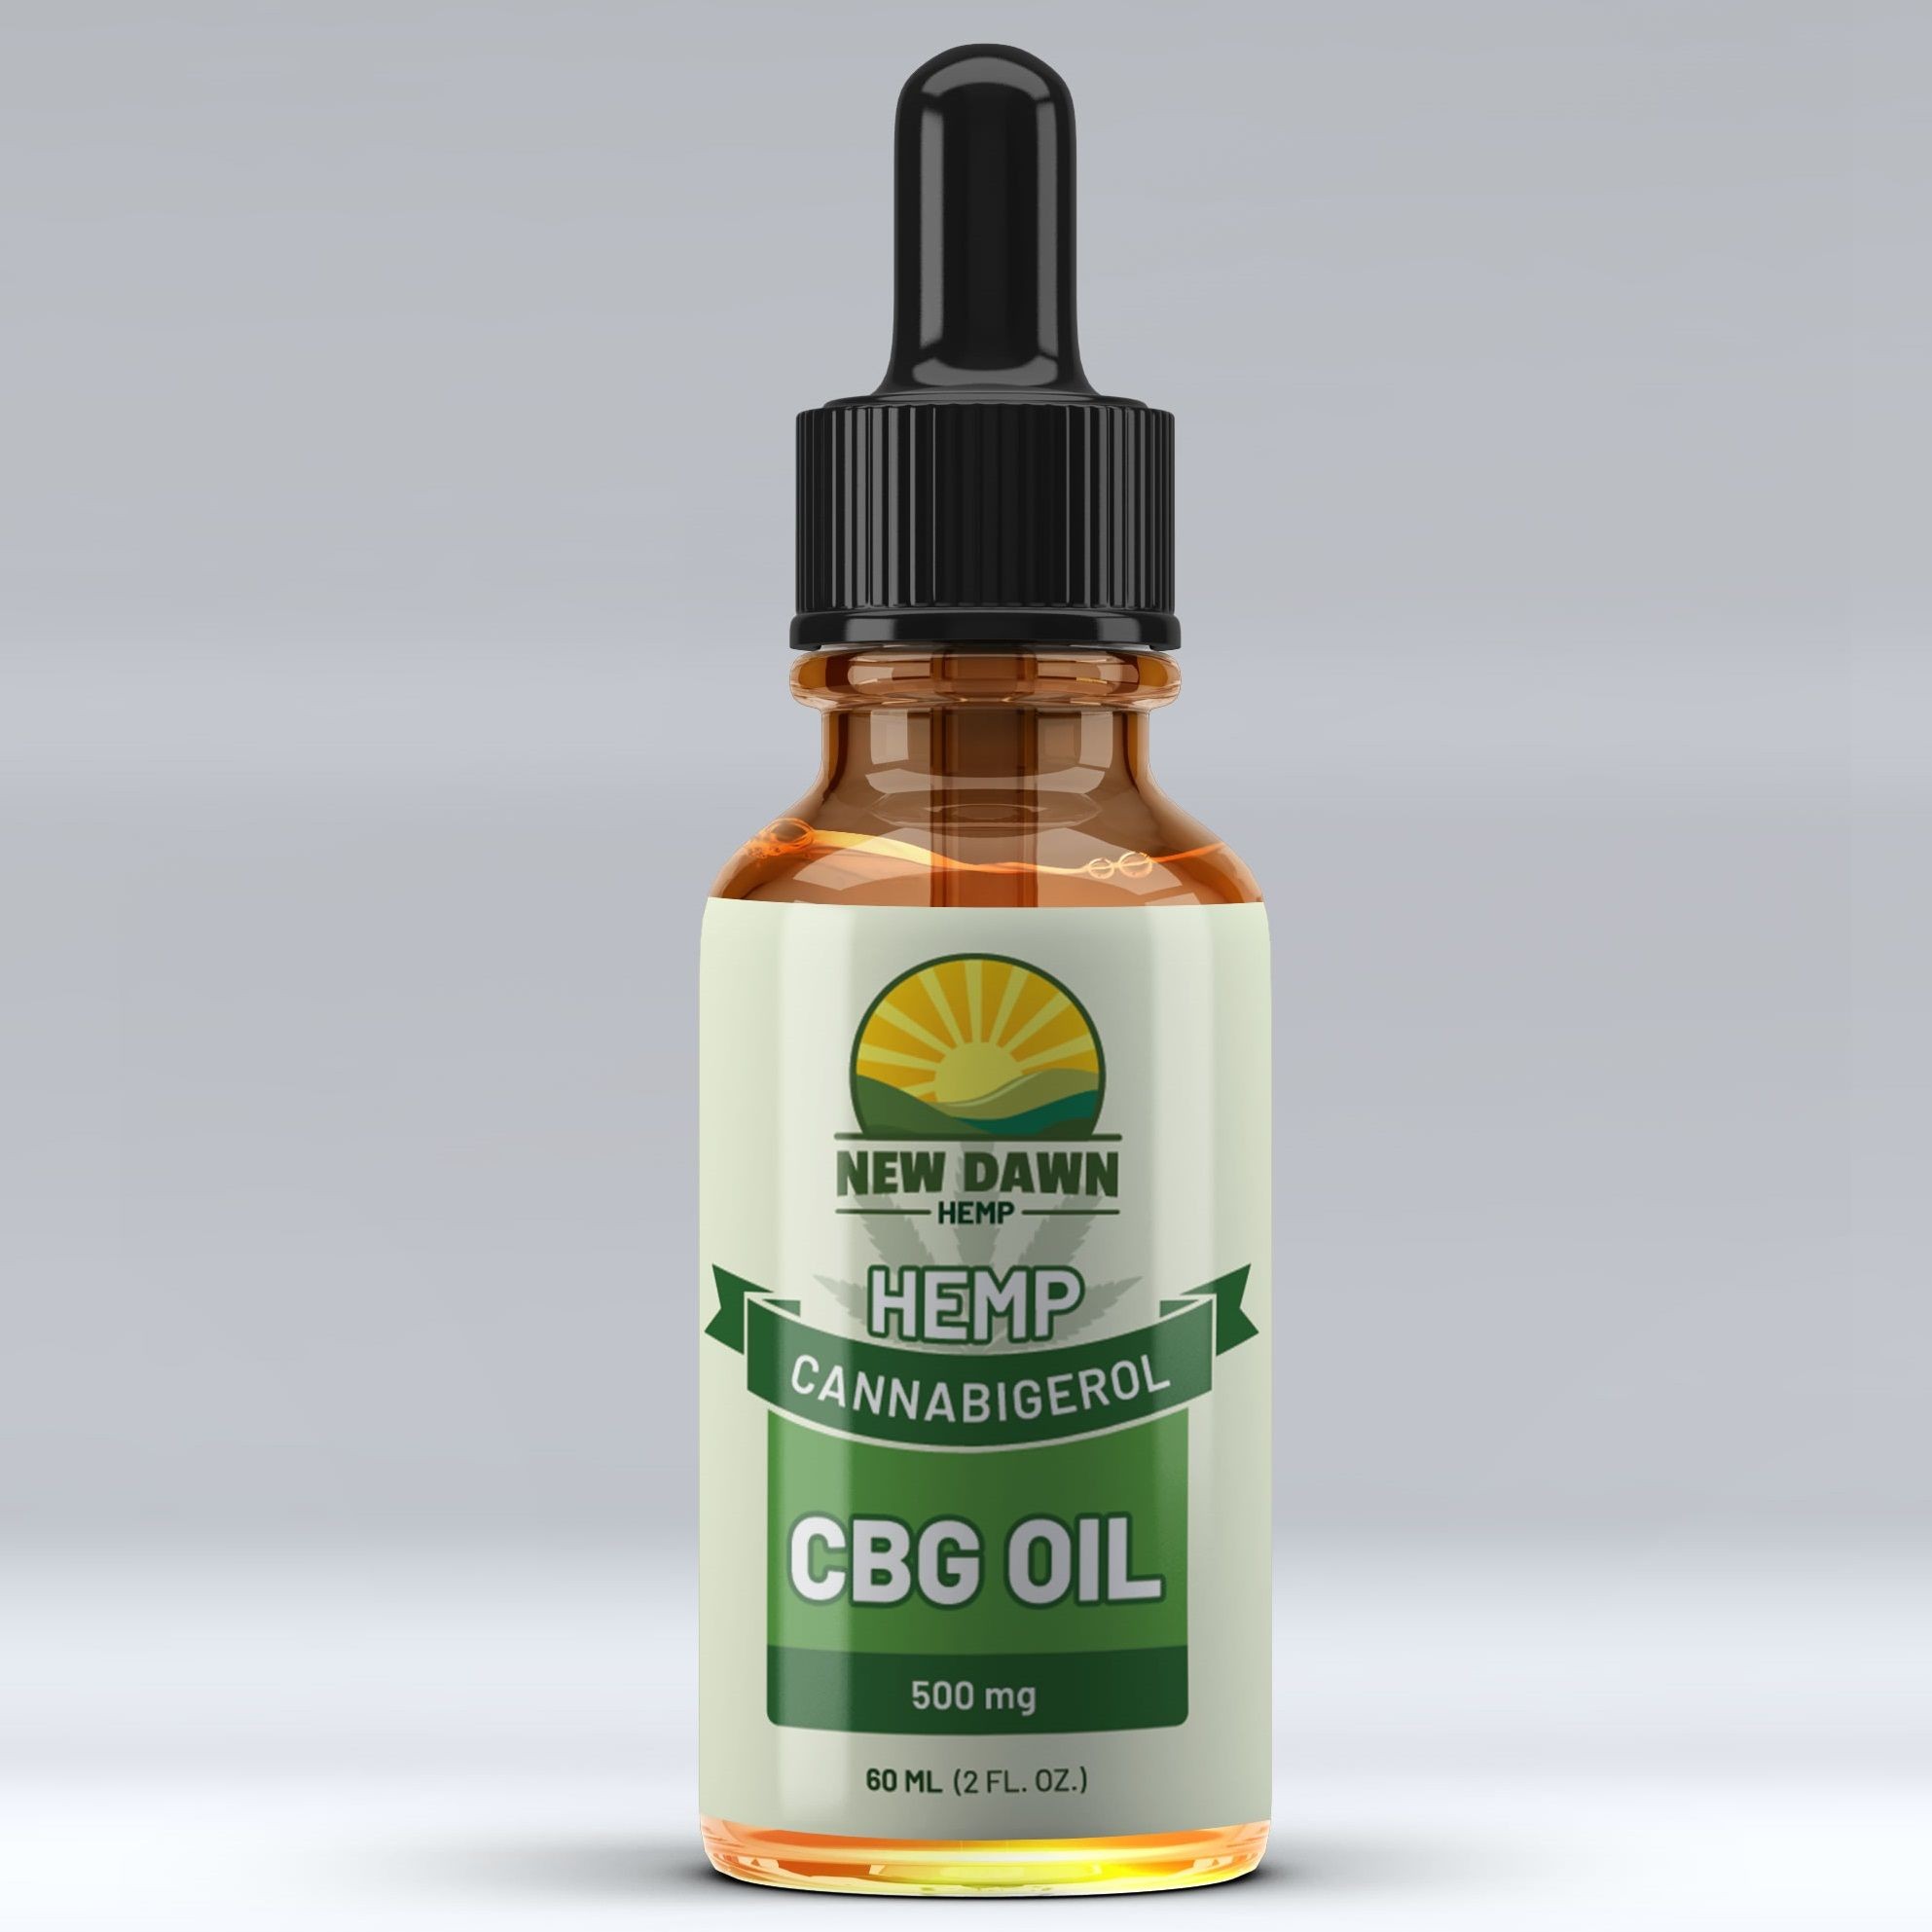 High Cbg Products - Cbg|Gummies|Cbd|Effects|Thc|Cannabinoid|Hemp|Cannabinoids|Image|Products|Courtesy|Product|Way|Benefits|Dosage|Everyone|Oil|People|Spectrum|Others|Gummy|Time|Dosages|Advantages|Cannabis|Results|Treatment|Body|Stomach|Tincture|Pain|Drug|Approach|Isolate|Side|Dog|Ingredients|List|State|Cannabigerol|Cbg Gummies|Psychoactive Effects|Full Spectrum Gummies|Image Courtesy|Full-Spectrum Cbd Products|Different Dosages|Right Dosage|Empty Stomach|Cbd Gummies|Cbd Isolate|Side Effects|Different Effects|Dog Cbg Gummies|Drug Test|Full-Spectrum Cbd Product|Few Things|Chronic Pain|Full-Spectrum Cbd|Psychotropic Effects|Final Thoughts|Right Dosage Everyone|Final Tips|Same Results|Cbg Ratio|Appetite Loss|Powerful Hunger Stimulant|Whereas Cbd|Thc Ratio Gummies|Dangerous Consequence|Numerous Diseases